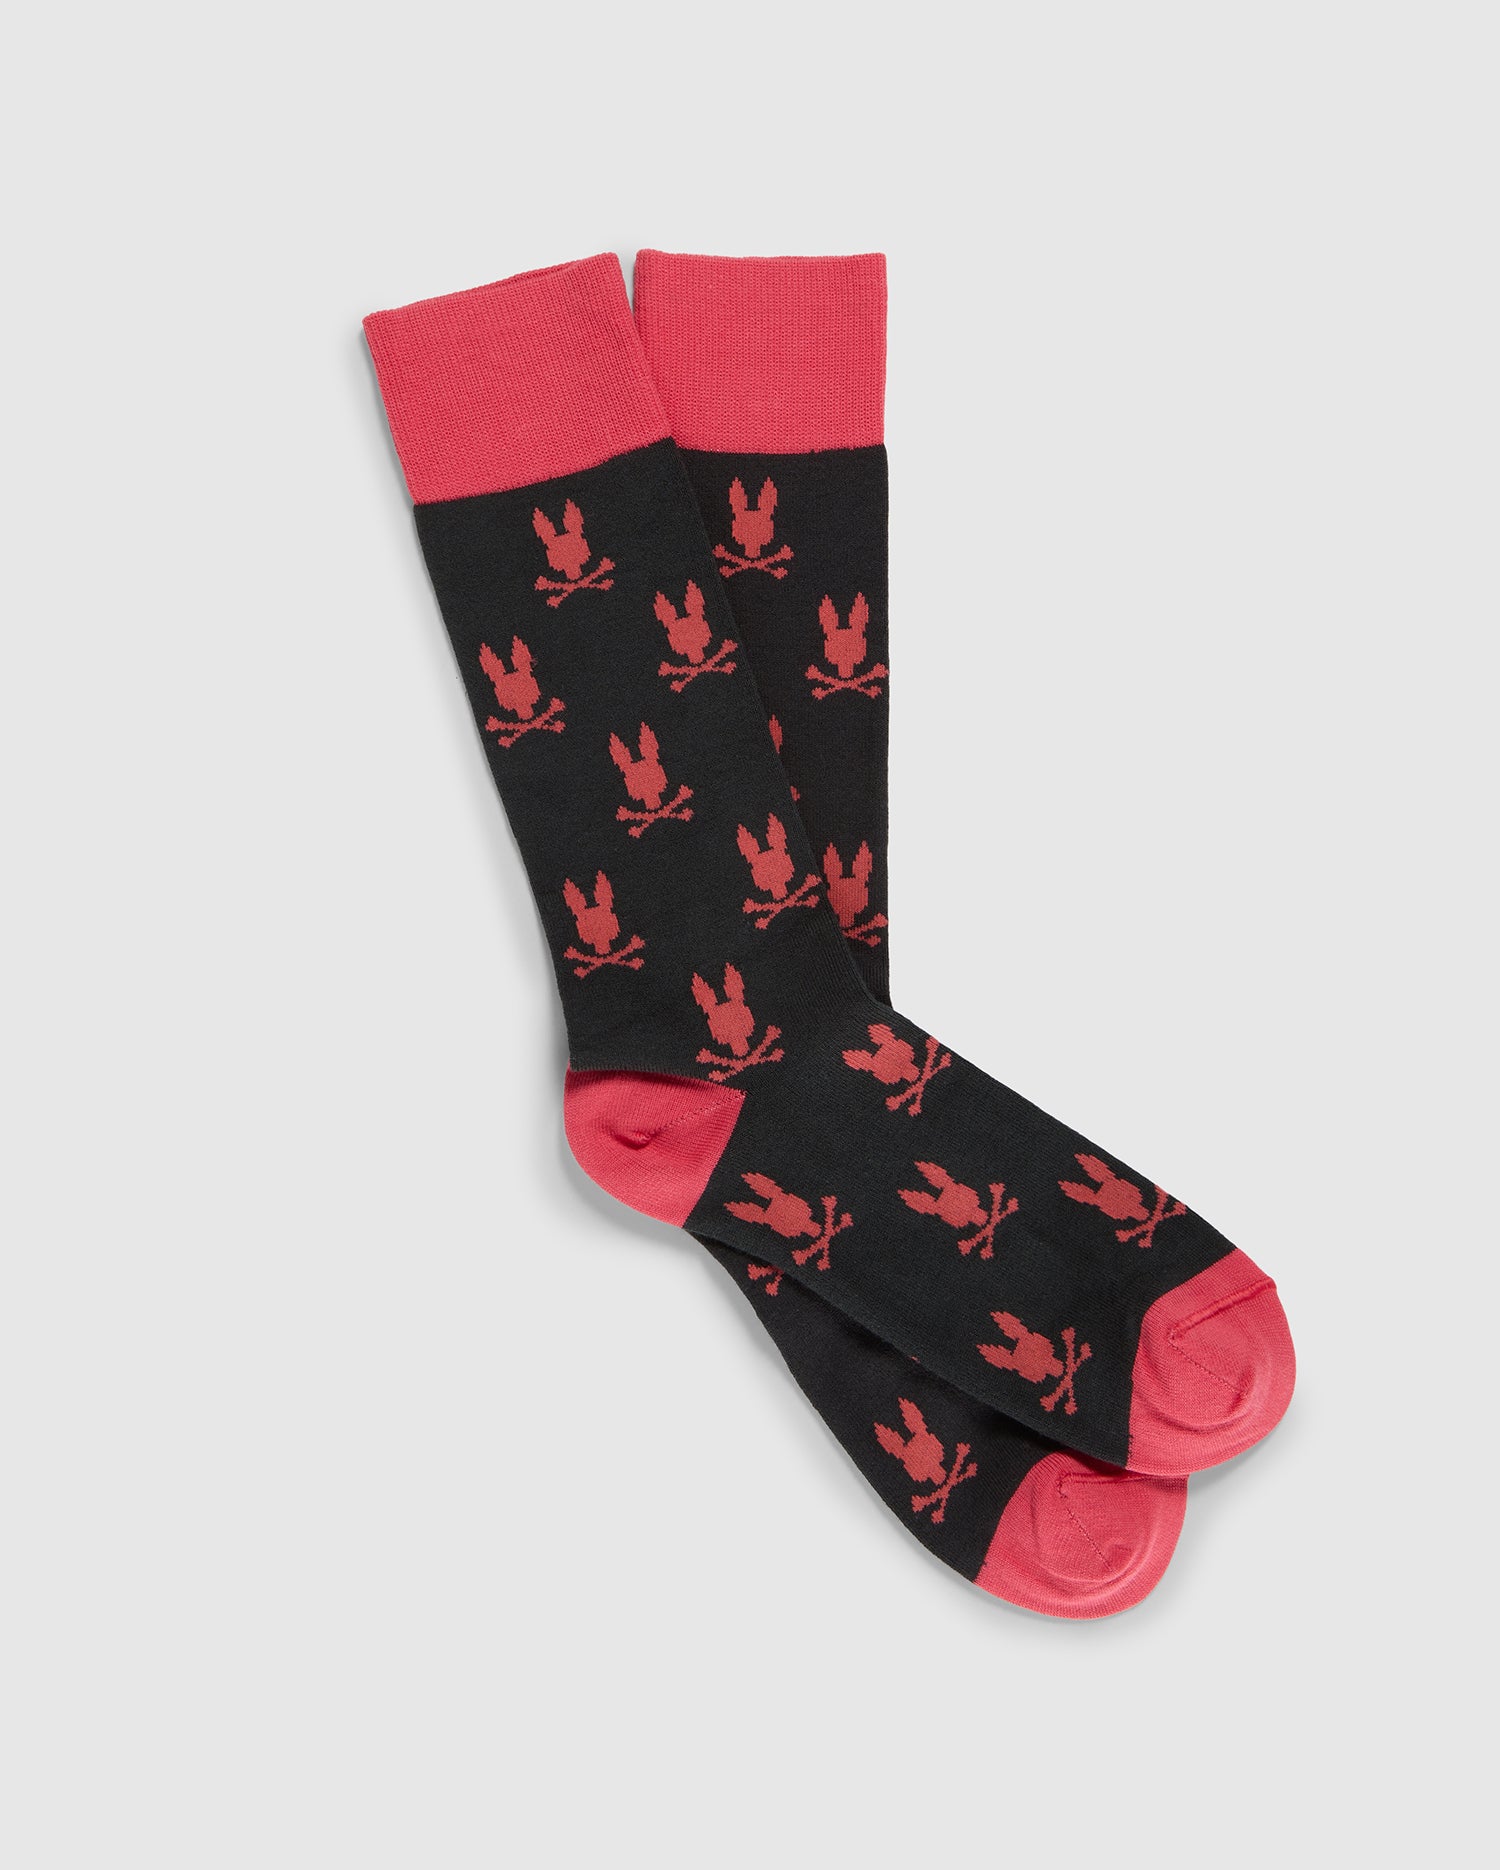 A pair of black and red MENS DRESS SOCK - B6F750B2SO by Psycho Bunny with a repeating pattern of red illustrations featuring a crown and a bird. Made from luxurious Peruvian Pima cotton, the socks have red cuffs, toes, and heels. The design is eye-catching and bold.